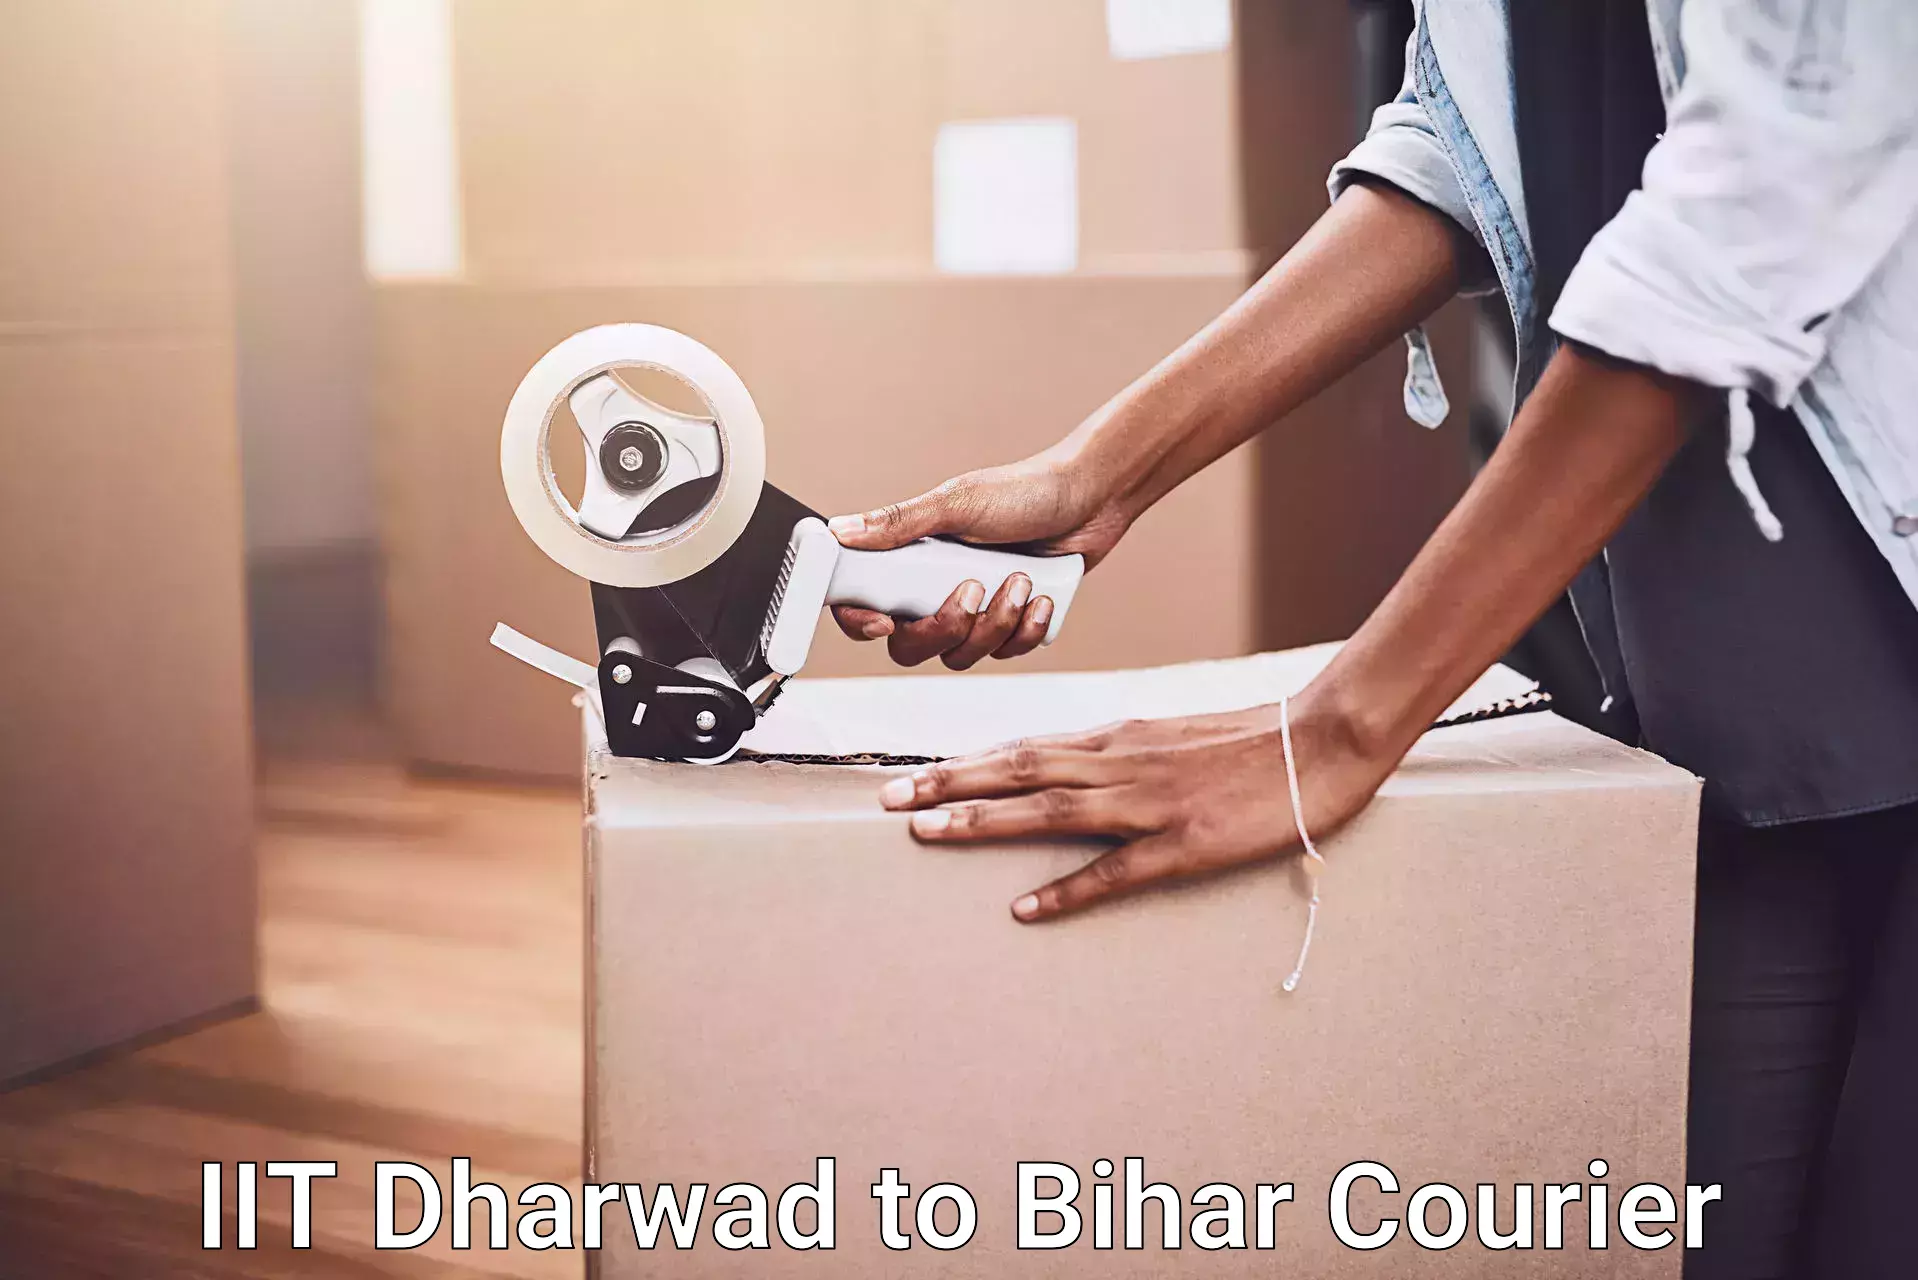 Home moving and storage IIT Dharwad to Sheohar